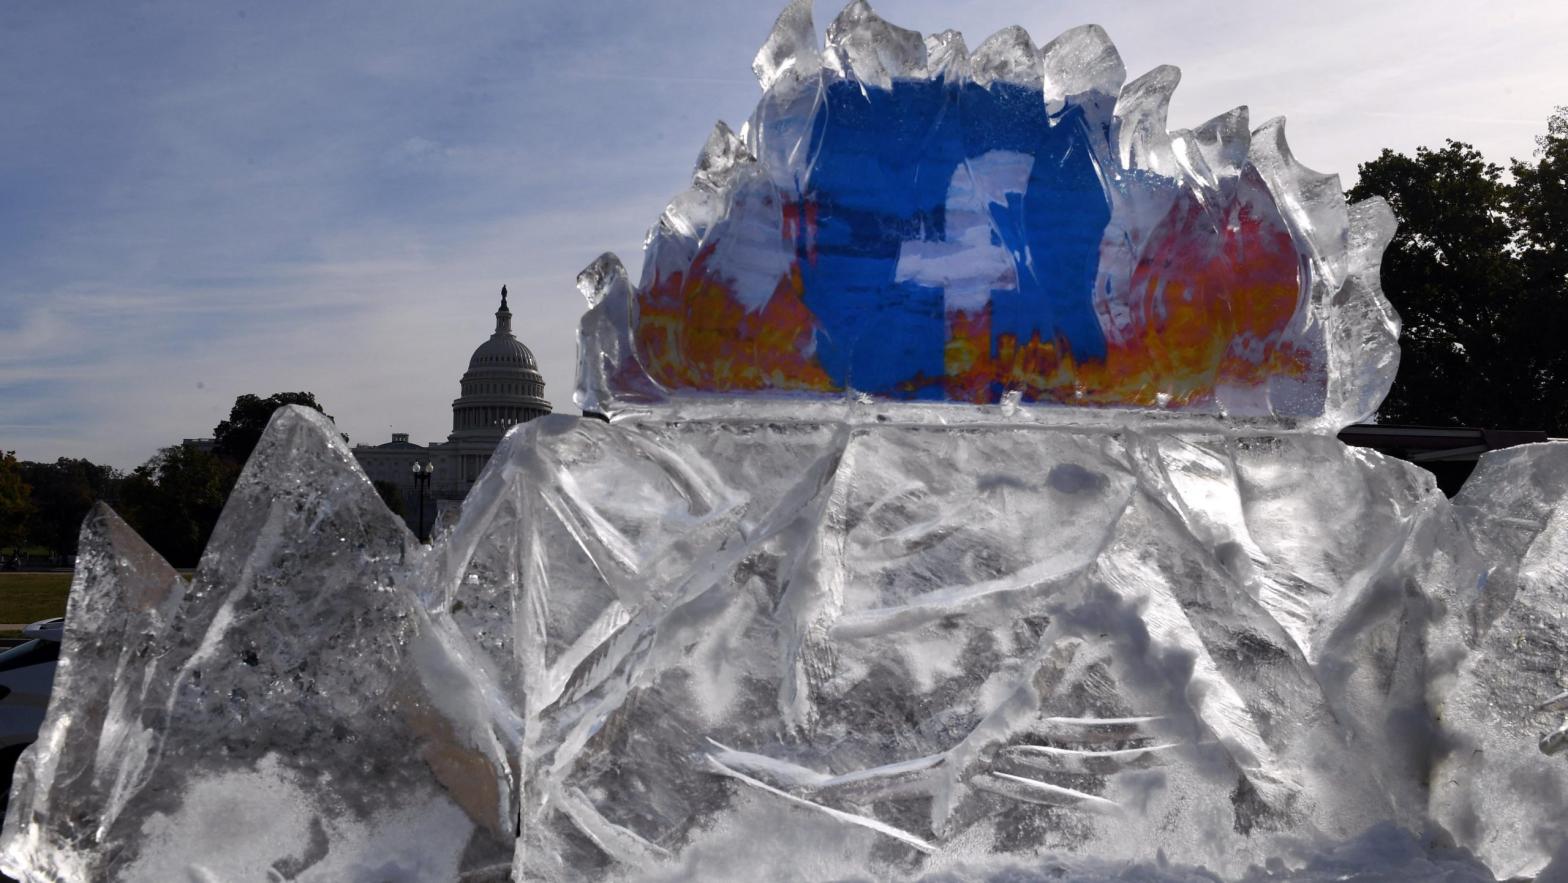 The Facebook logo contained within a 2,268 kg ice sculpture erected by climate activists protesting the company's handling of climate change denialism in front of the U.S. Capitol on Nov. 4, 2021. (Photo: Olivier Douliery / AFP, Getty Images)